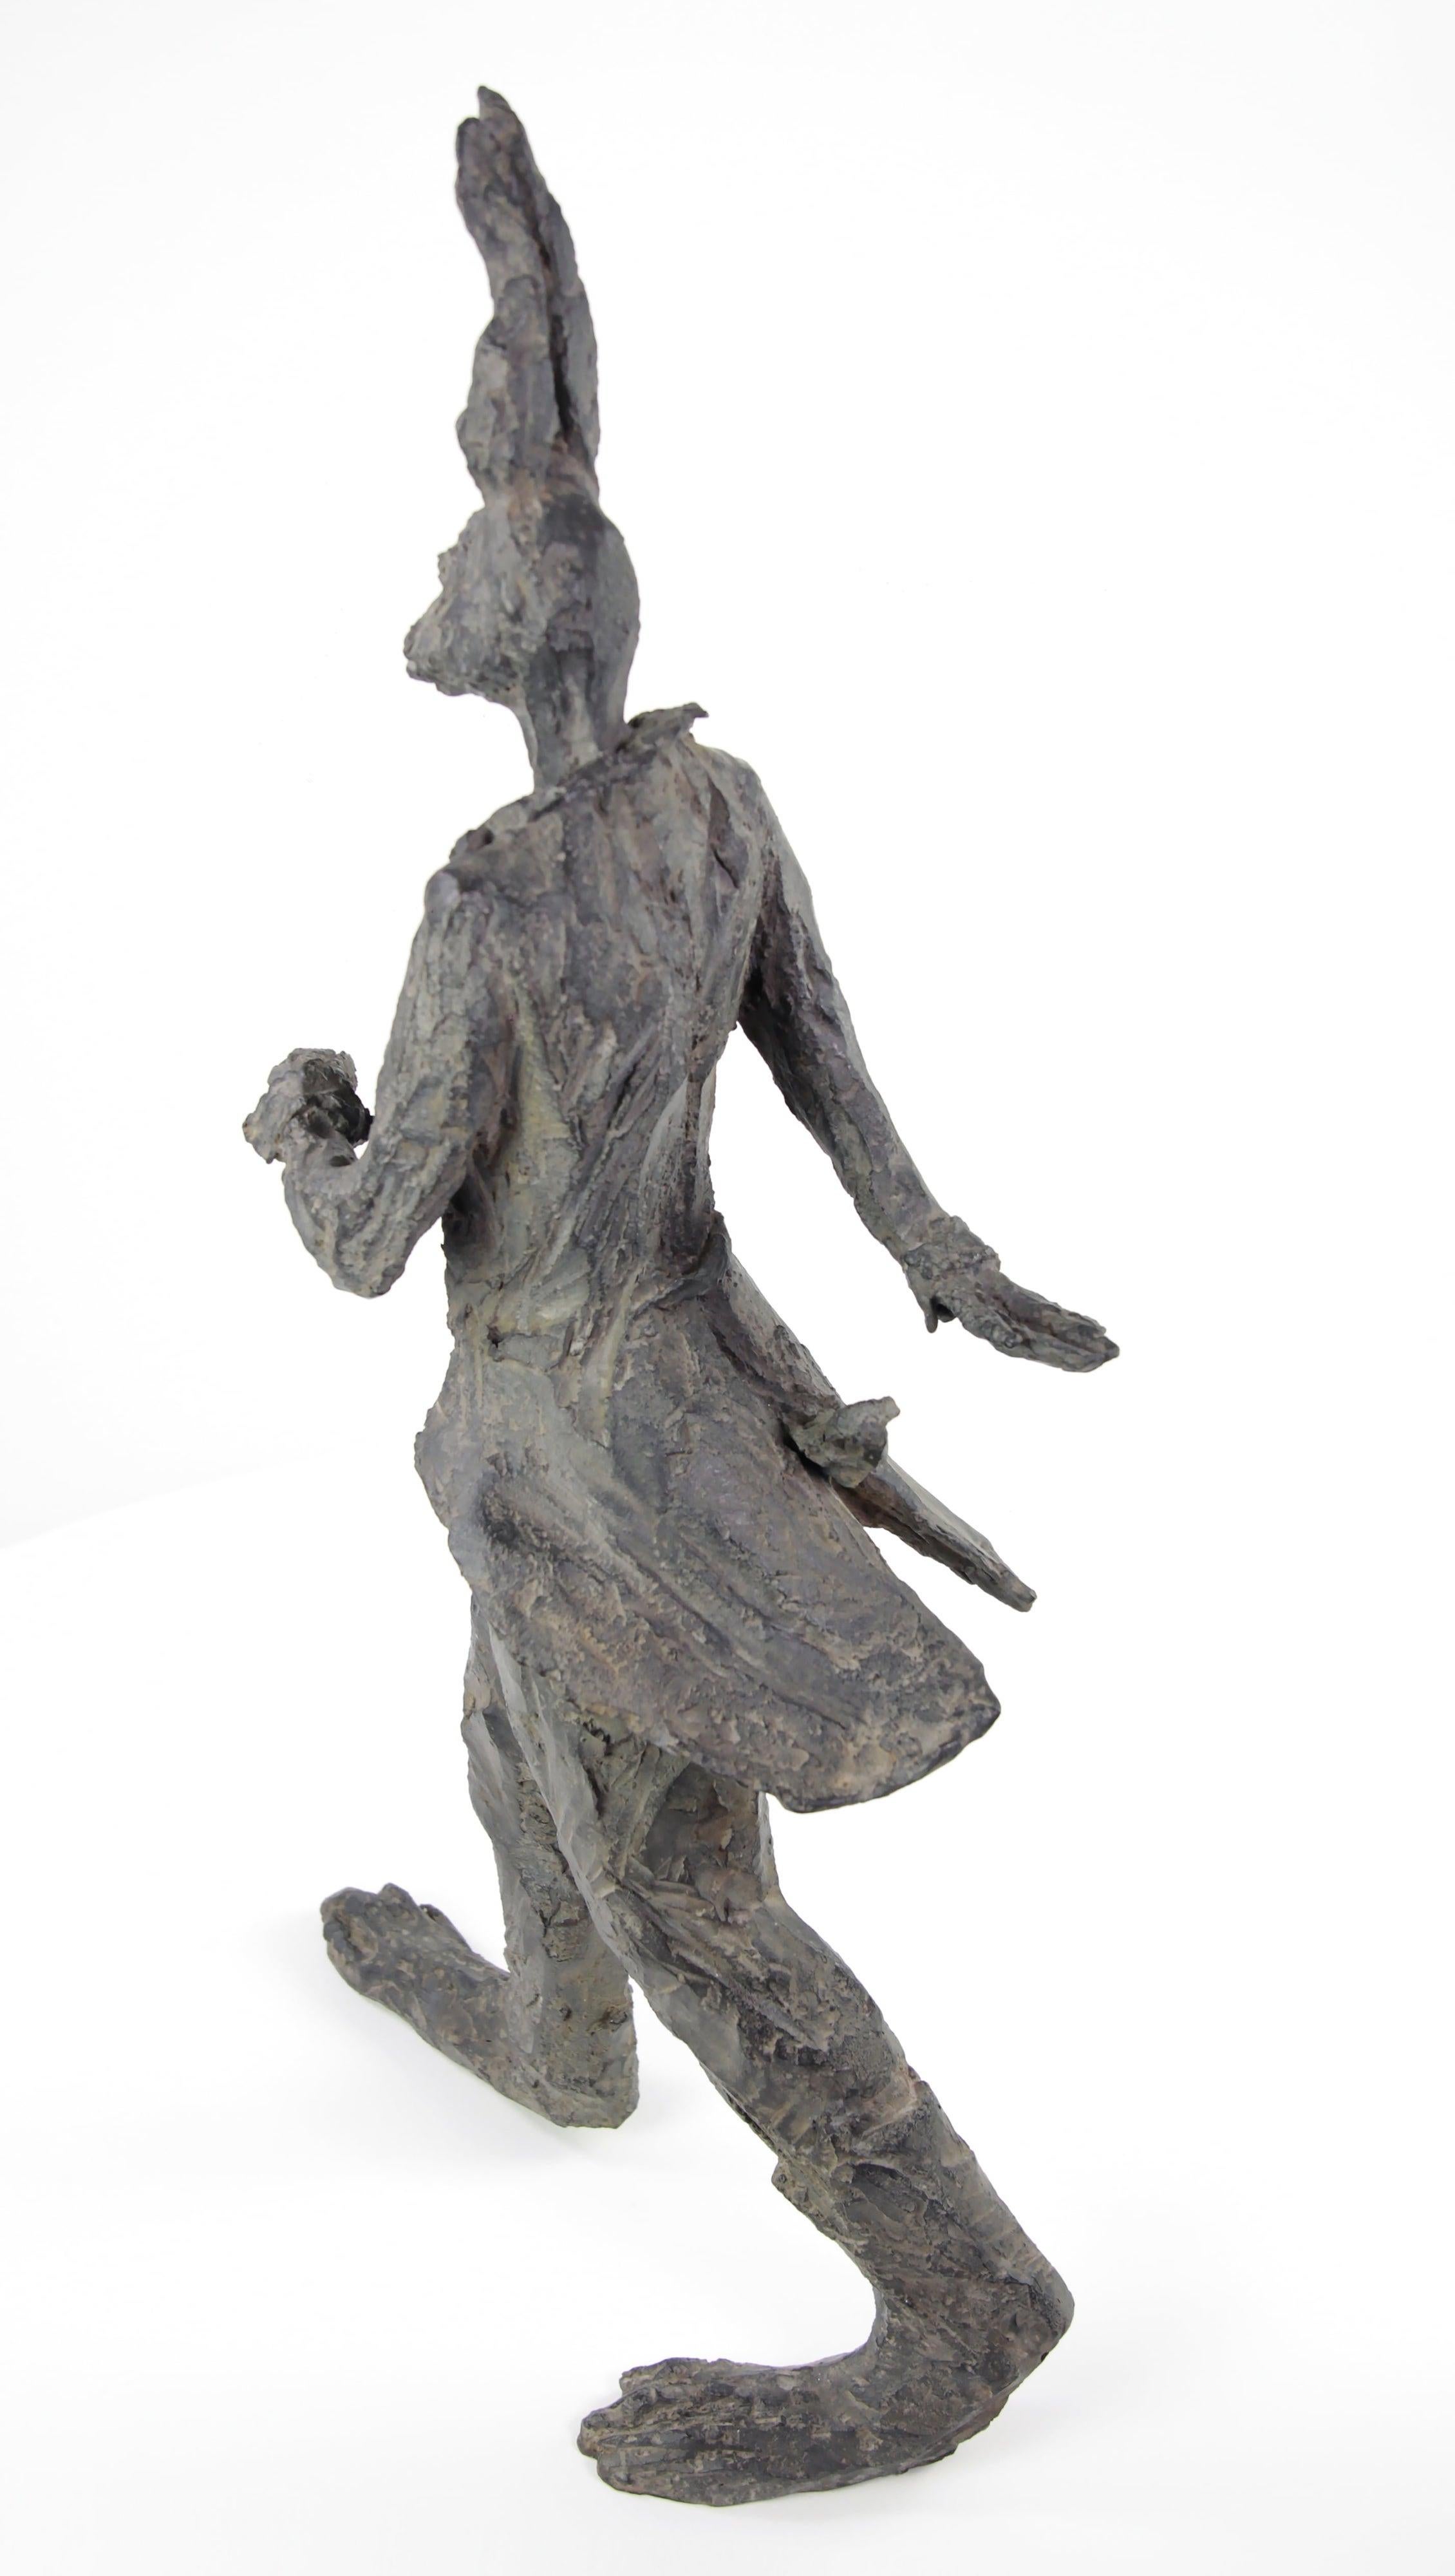 Walking Hare - Balance - Sculpture by Cécile Raynal